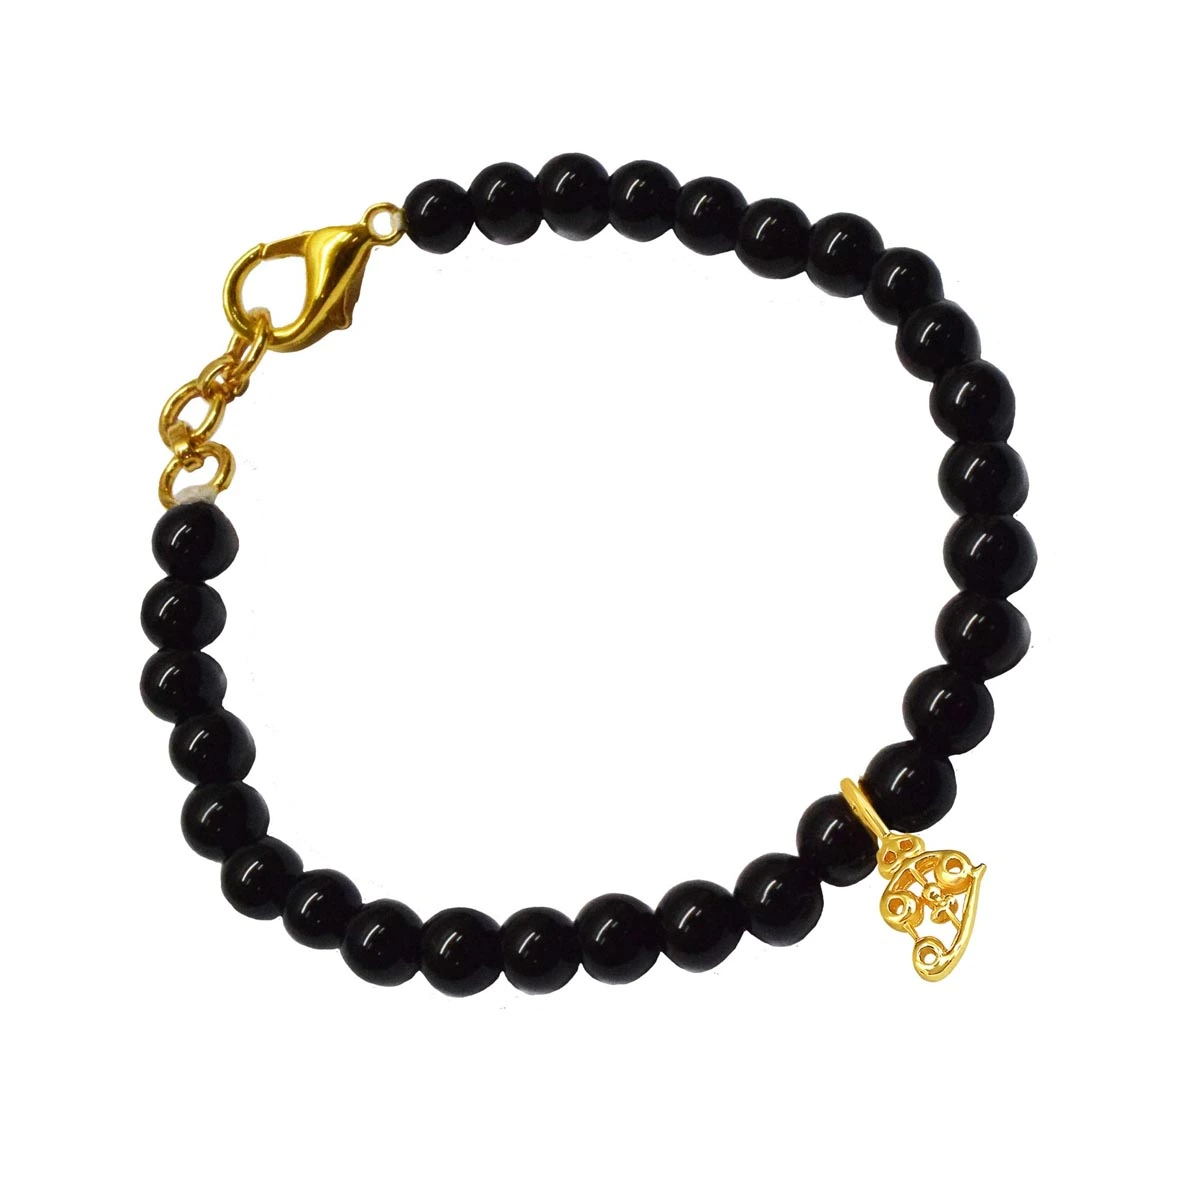 Gold Plated Sterling Silver Shiva's Trishul with Black Onyx Bracelet for Men and Women (SB69)